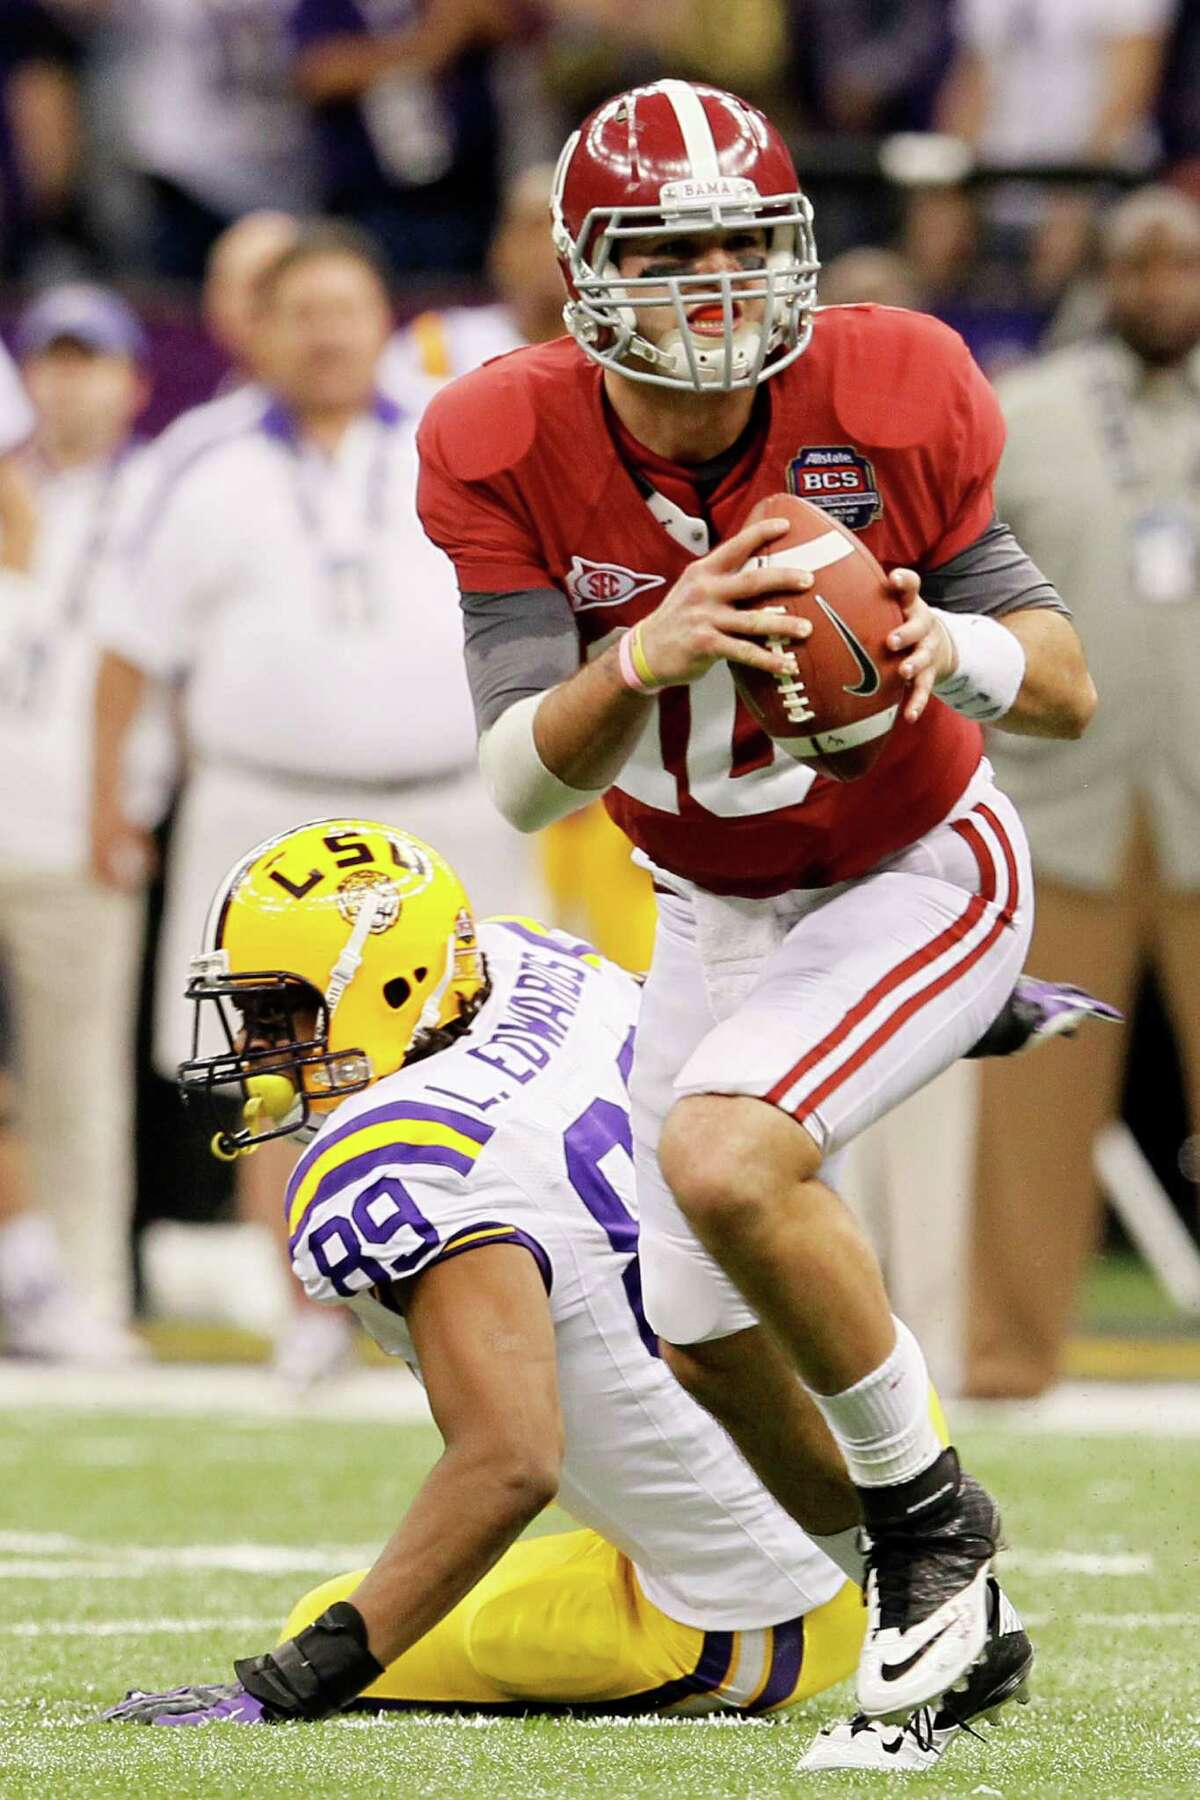 NEW ORLEANS, LA - JANUARY 09: AJ McCarron #10 of the Alabama Crimson Tide runs with the ball against Lavar Edwards #89 of the Louisiana State University Tigers during the 2012 Allstate BCS National Championship Game at Mercedes-Benz Superdome on January 9, 2012 in New Orleans, Louisiana.